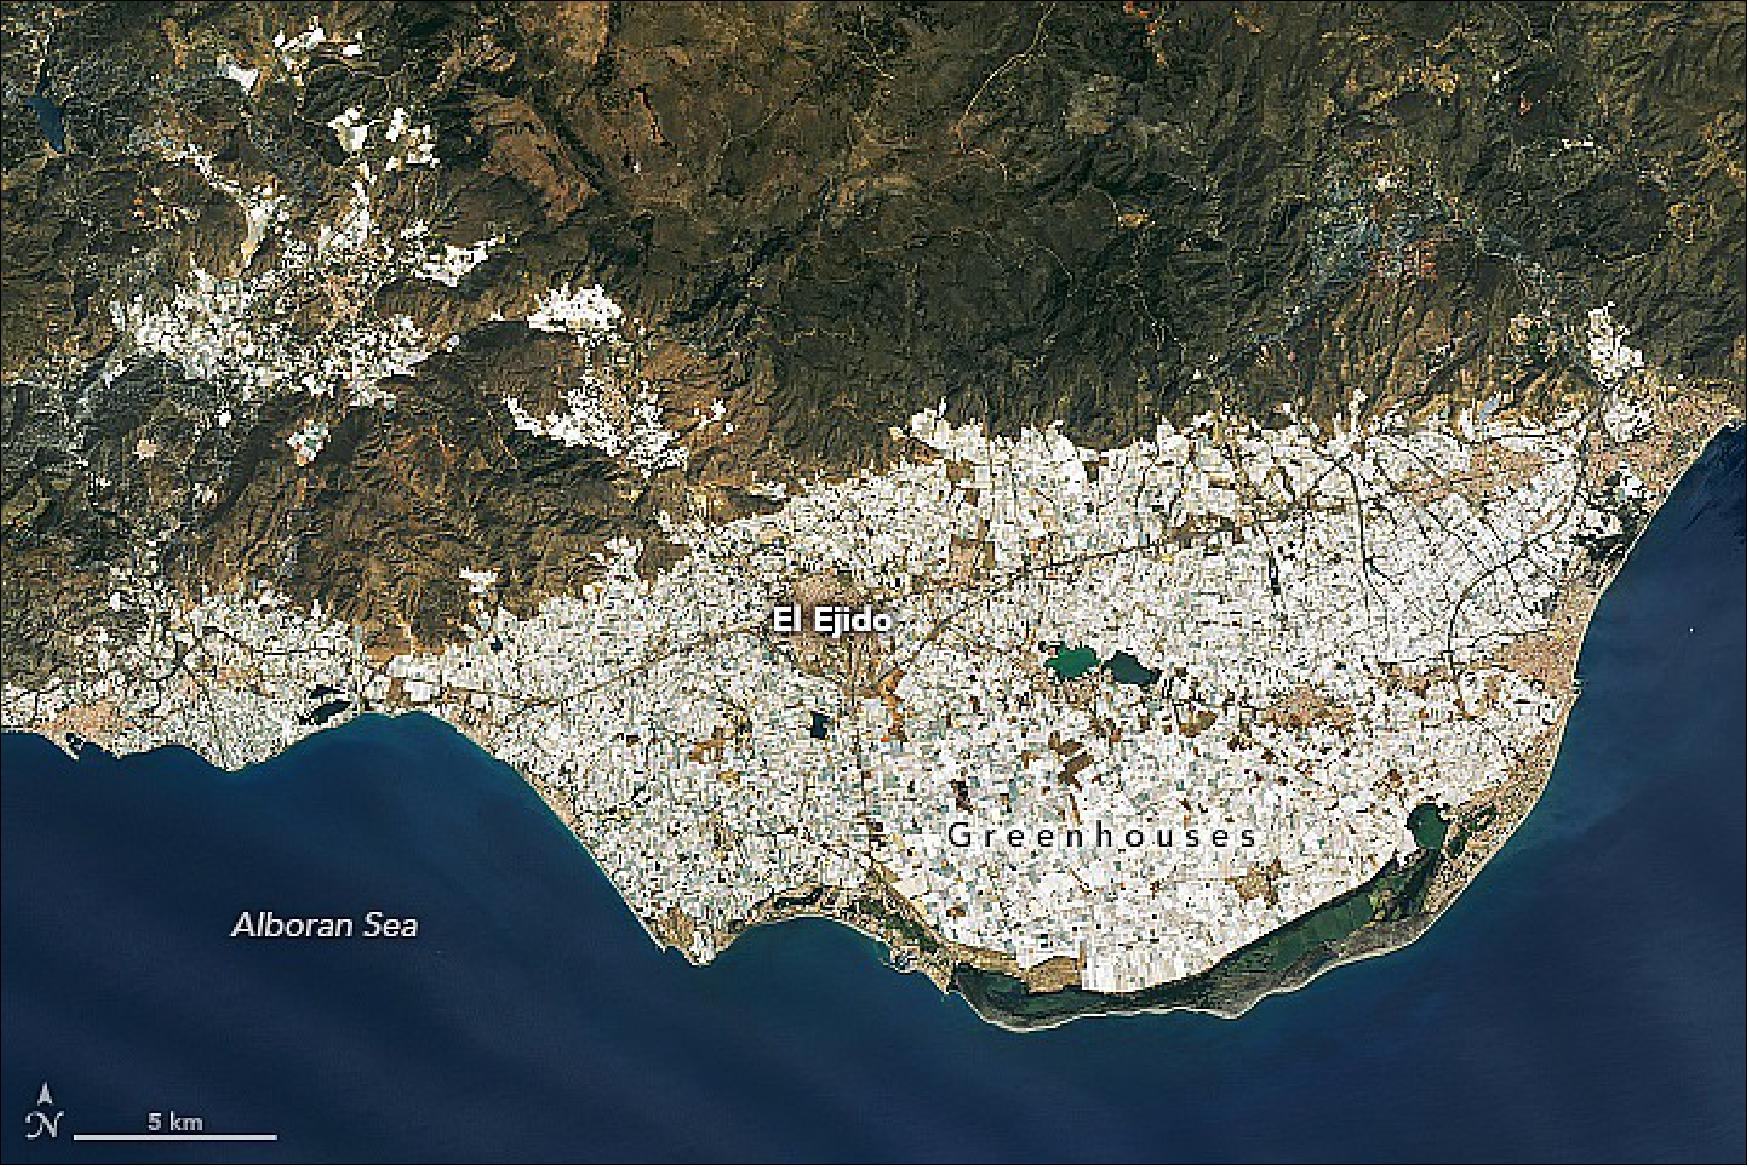 Figure 18: Clear skies and plastic have made it possible for the dry province in southeastern Spain to become a major exporter of tomatoes and other produce (image credit: NASA Earth Observatory)